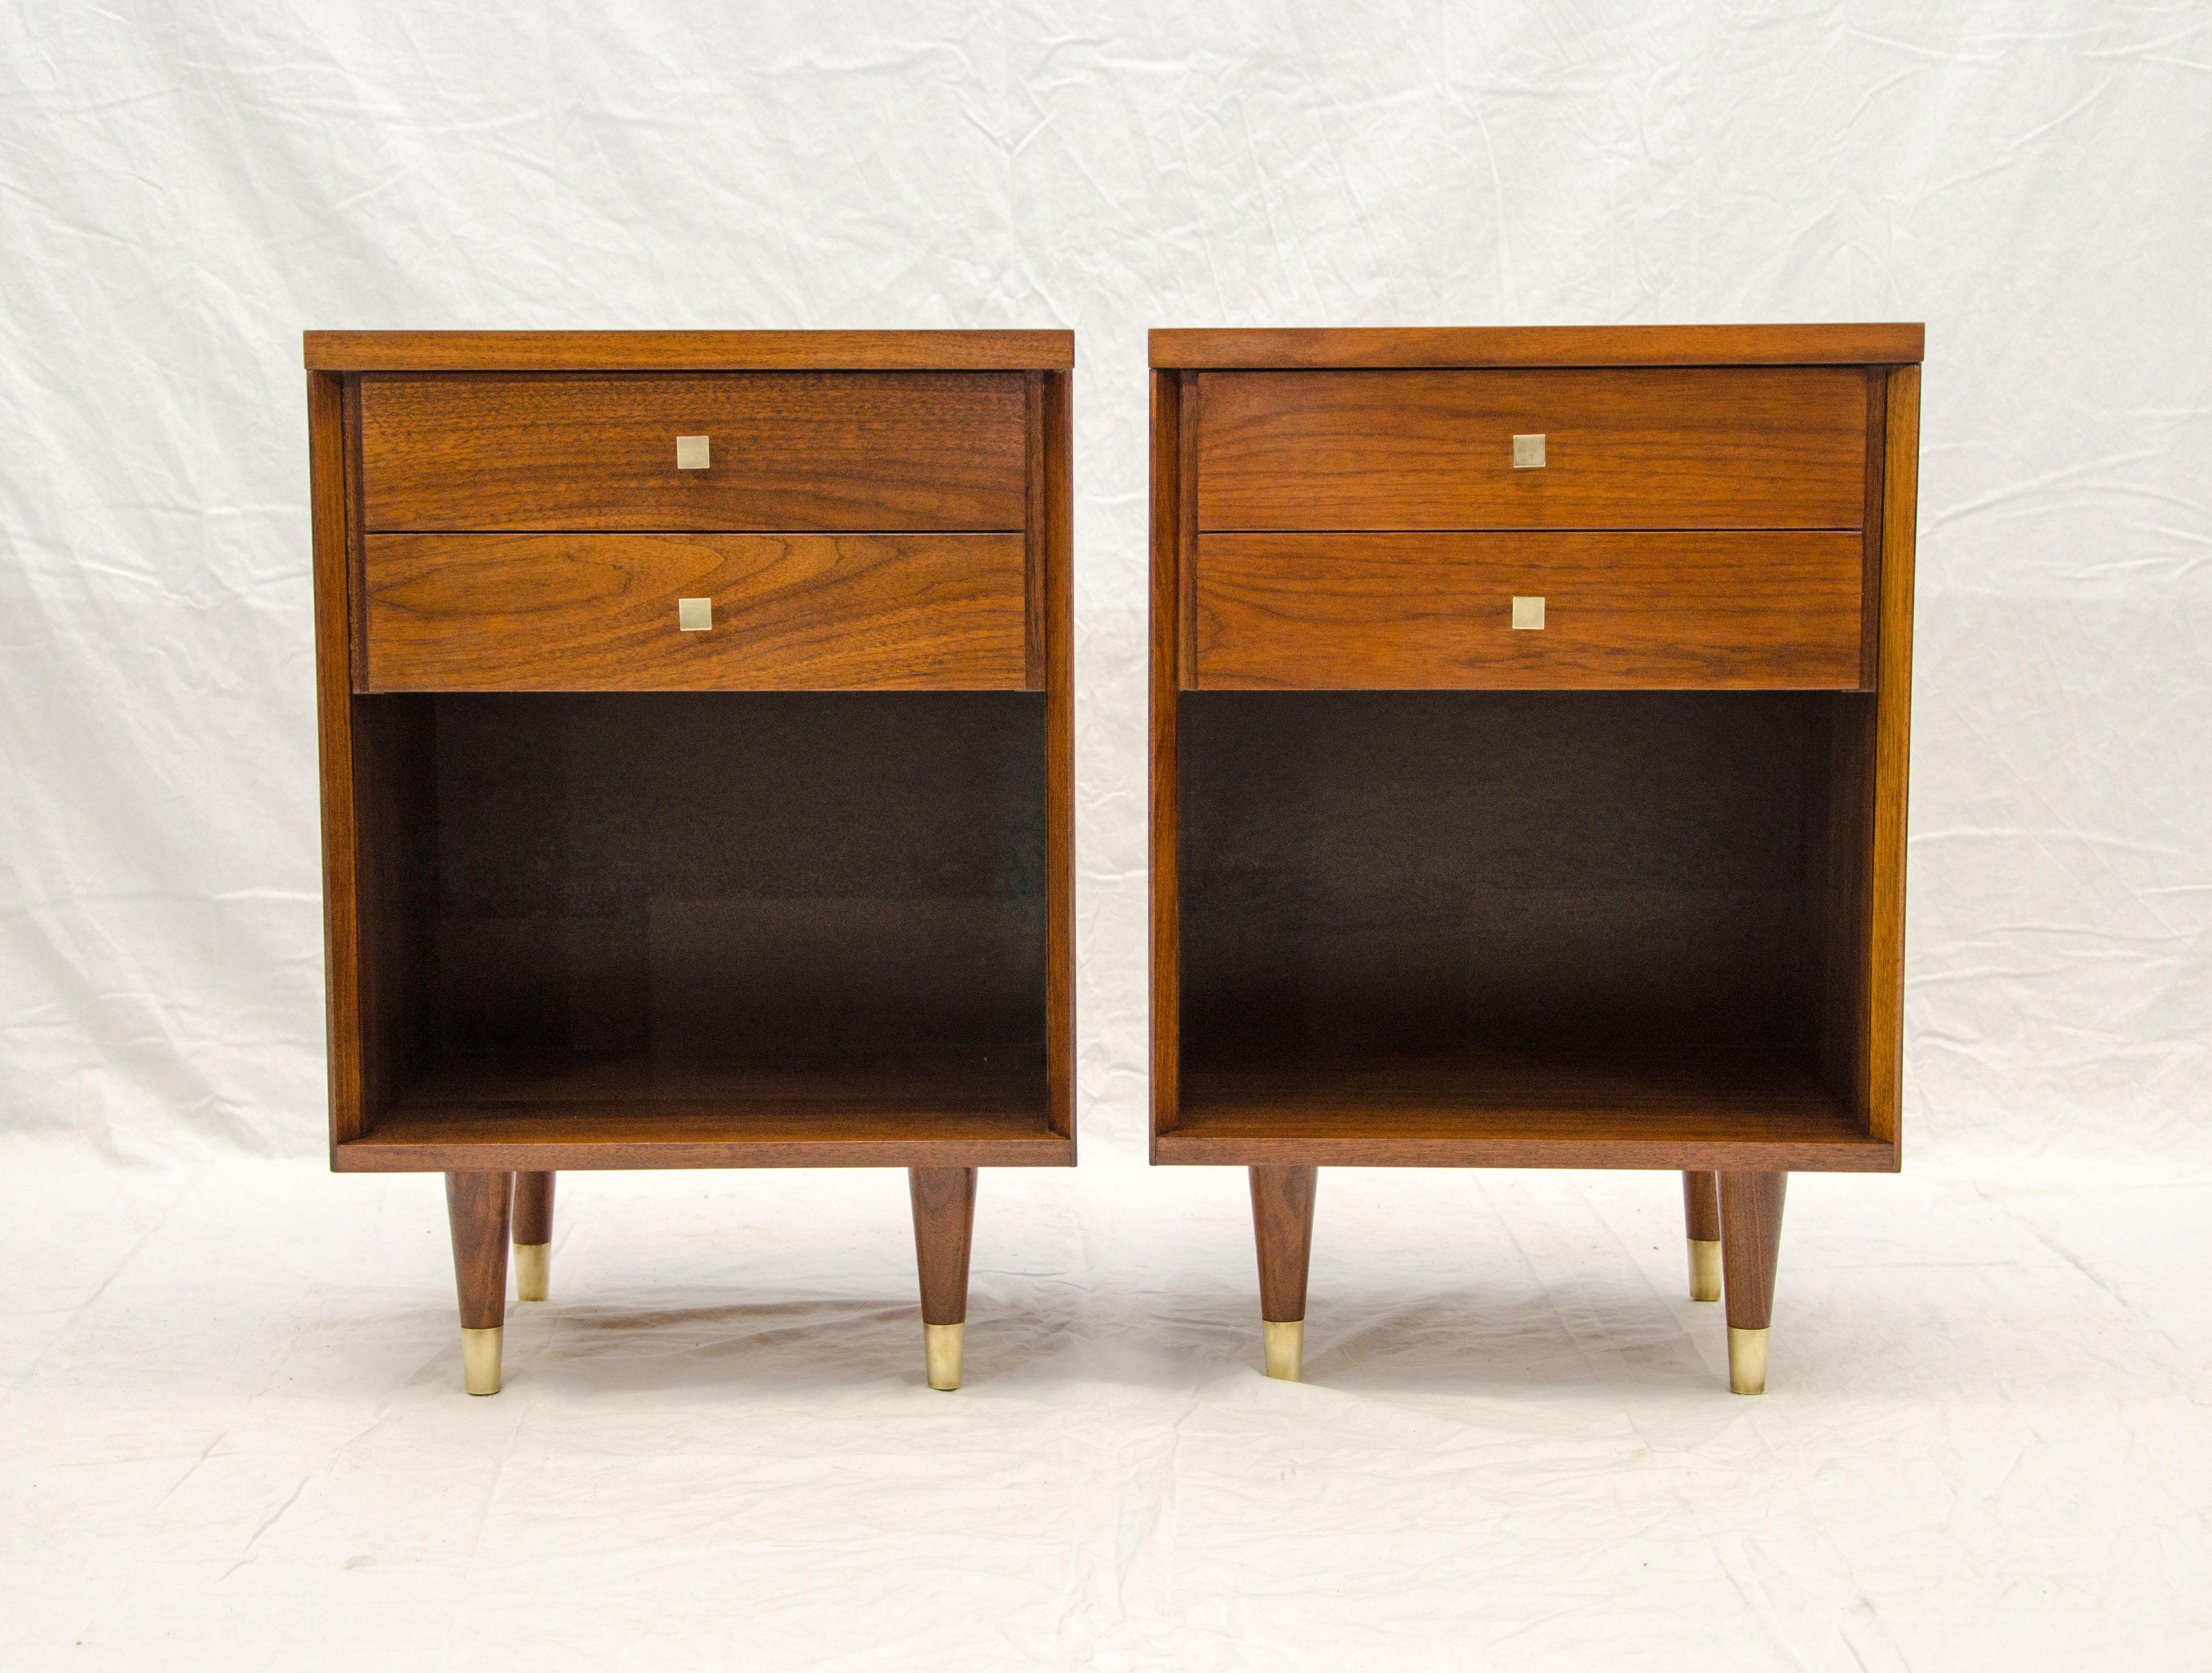 Nice pair of taller walnut nightstands with John Stuart tags. There are two small drawers (2 3/4